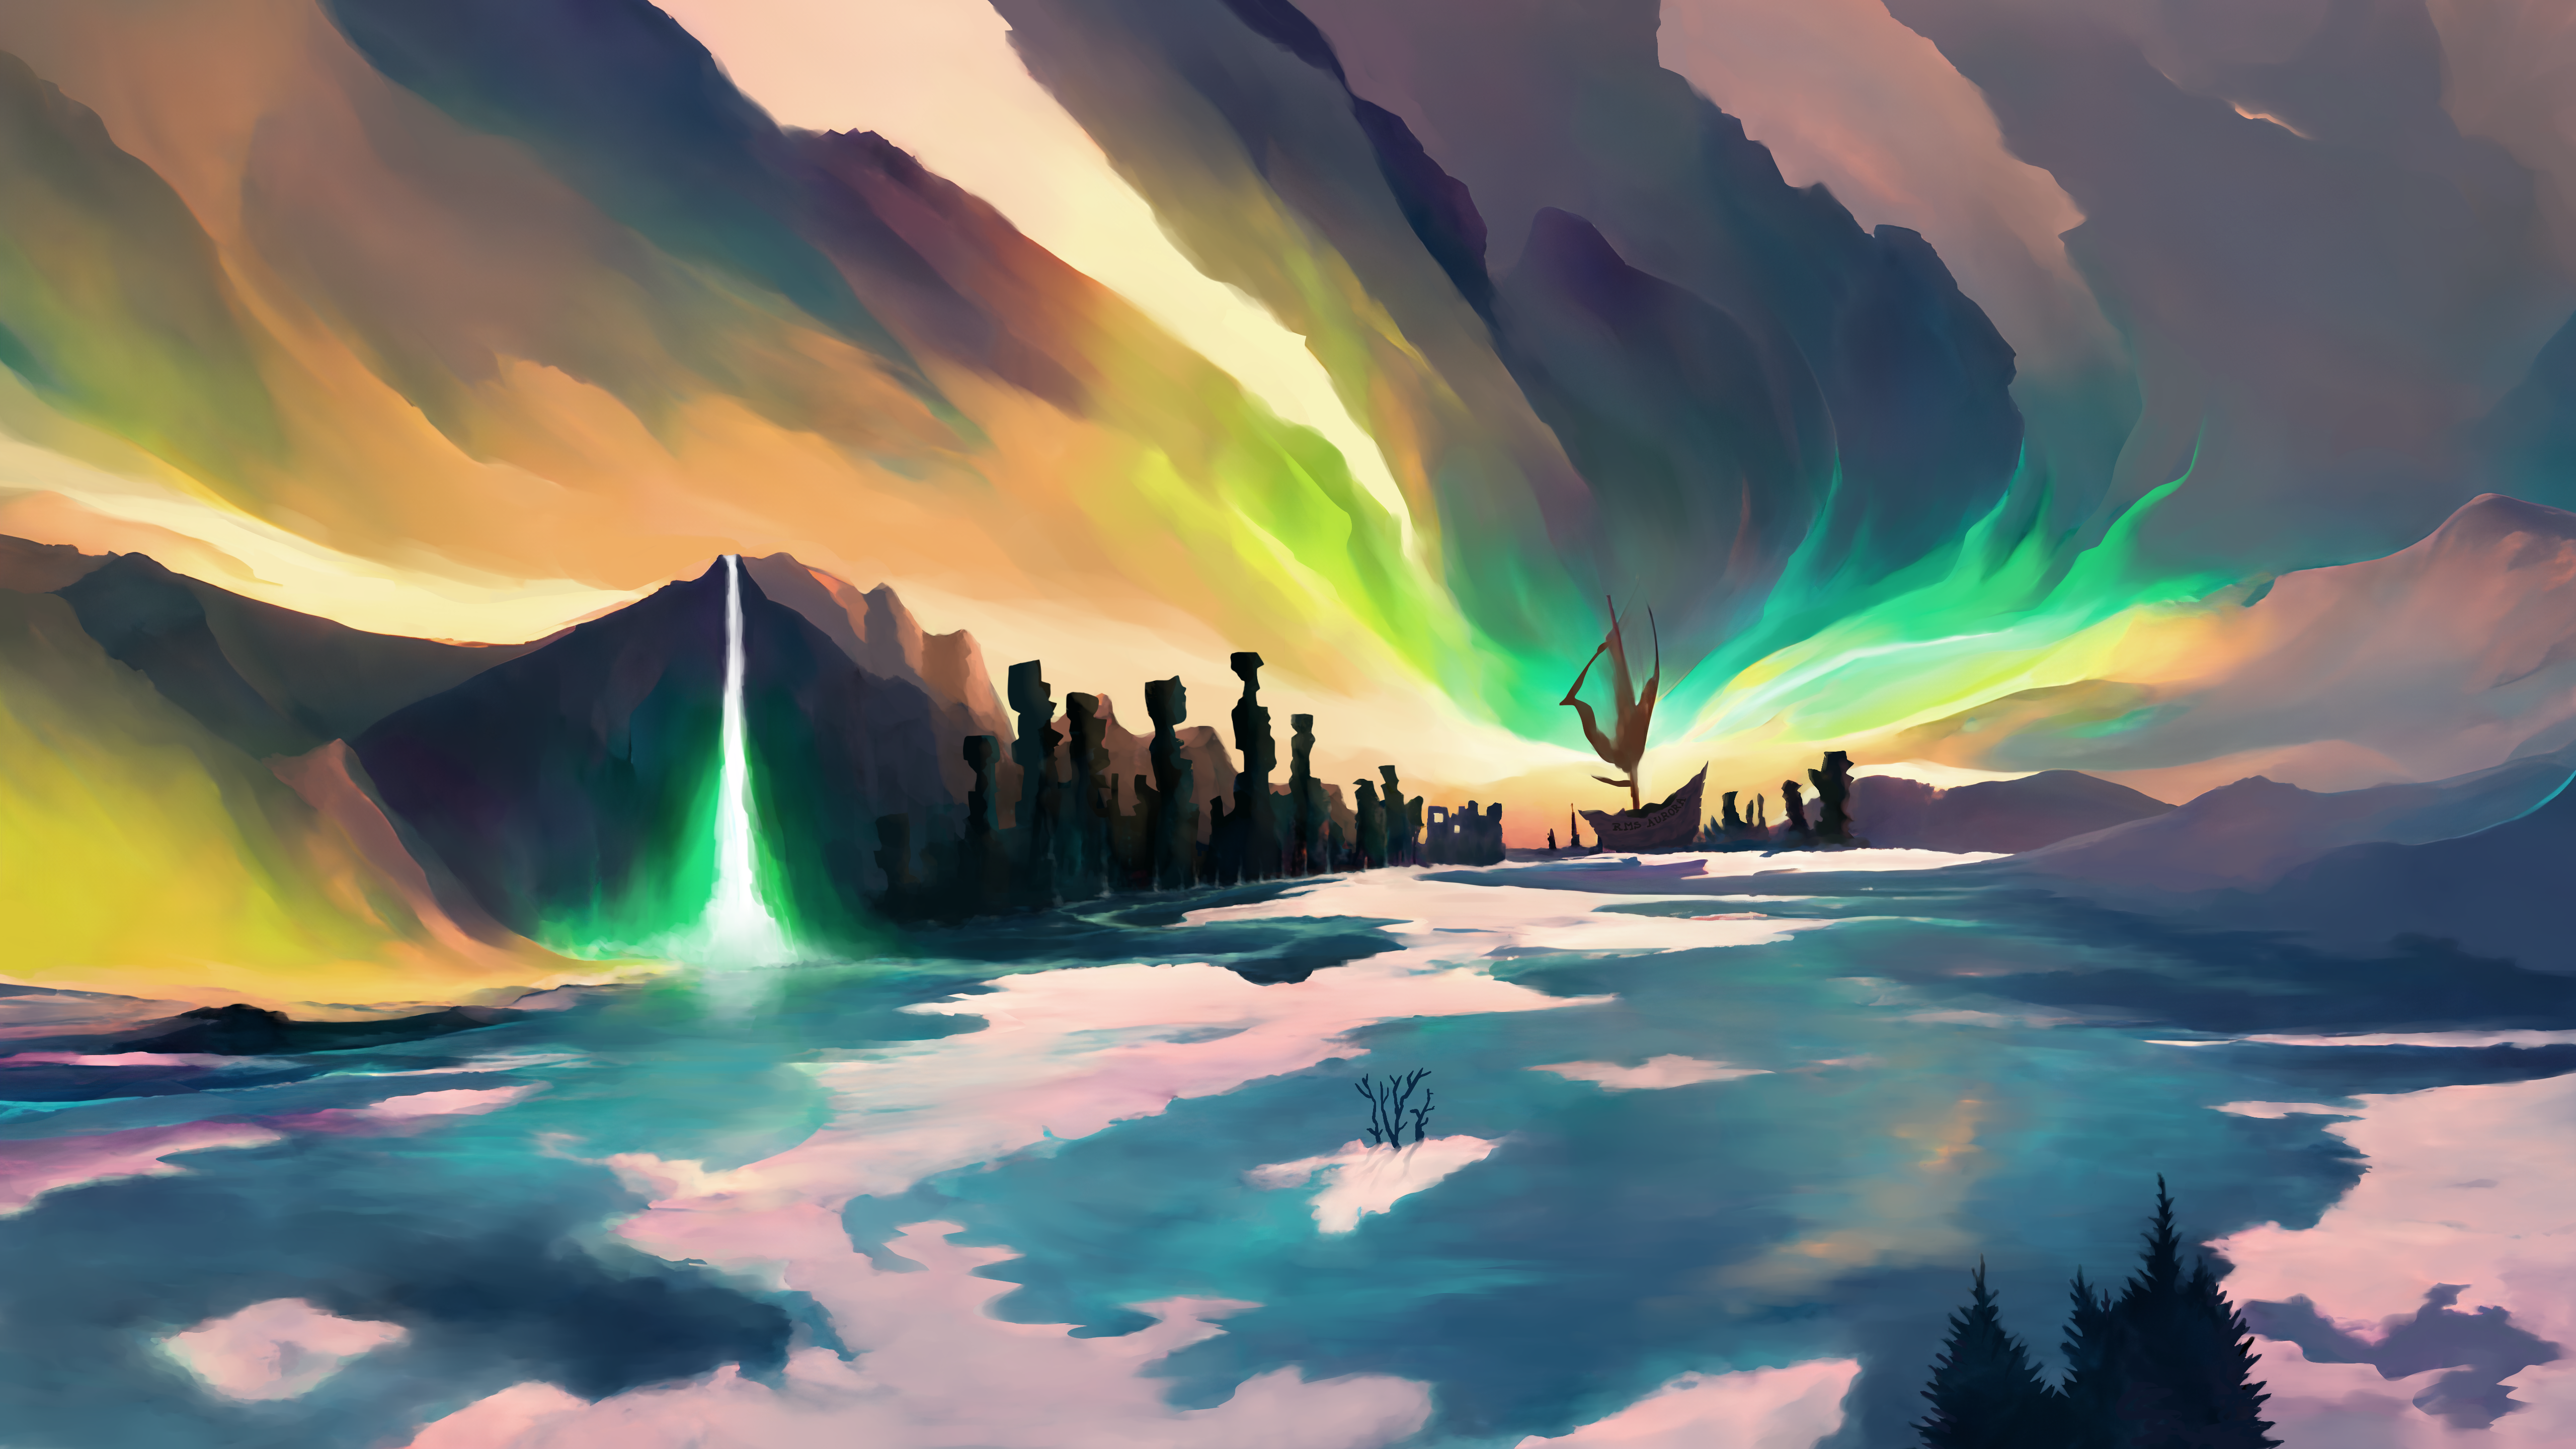 Digital painting of an aurora borealis above a shipwreck in a frozen land by dpcdpc11